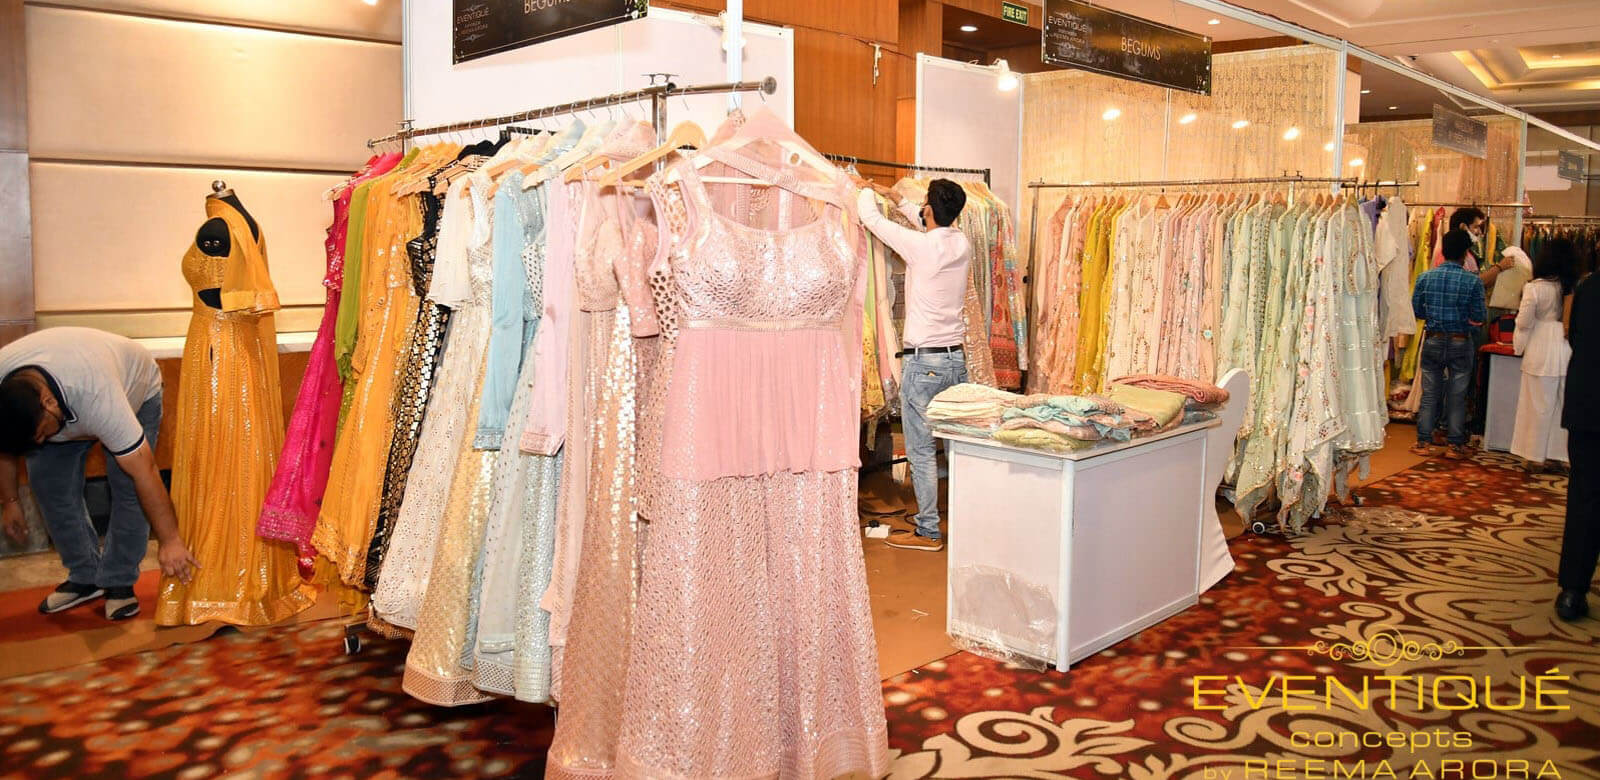 Fashion and Lifestyle Exhibition